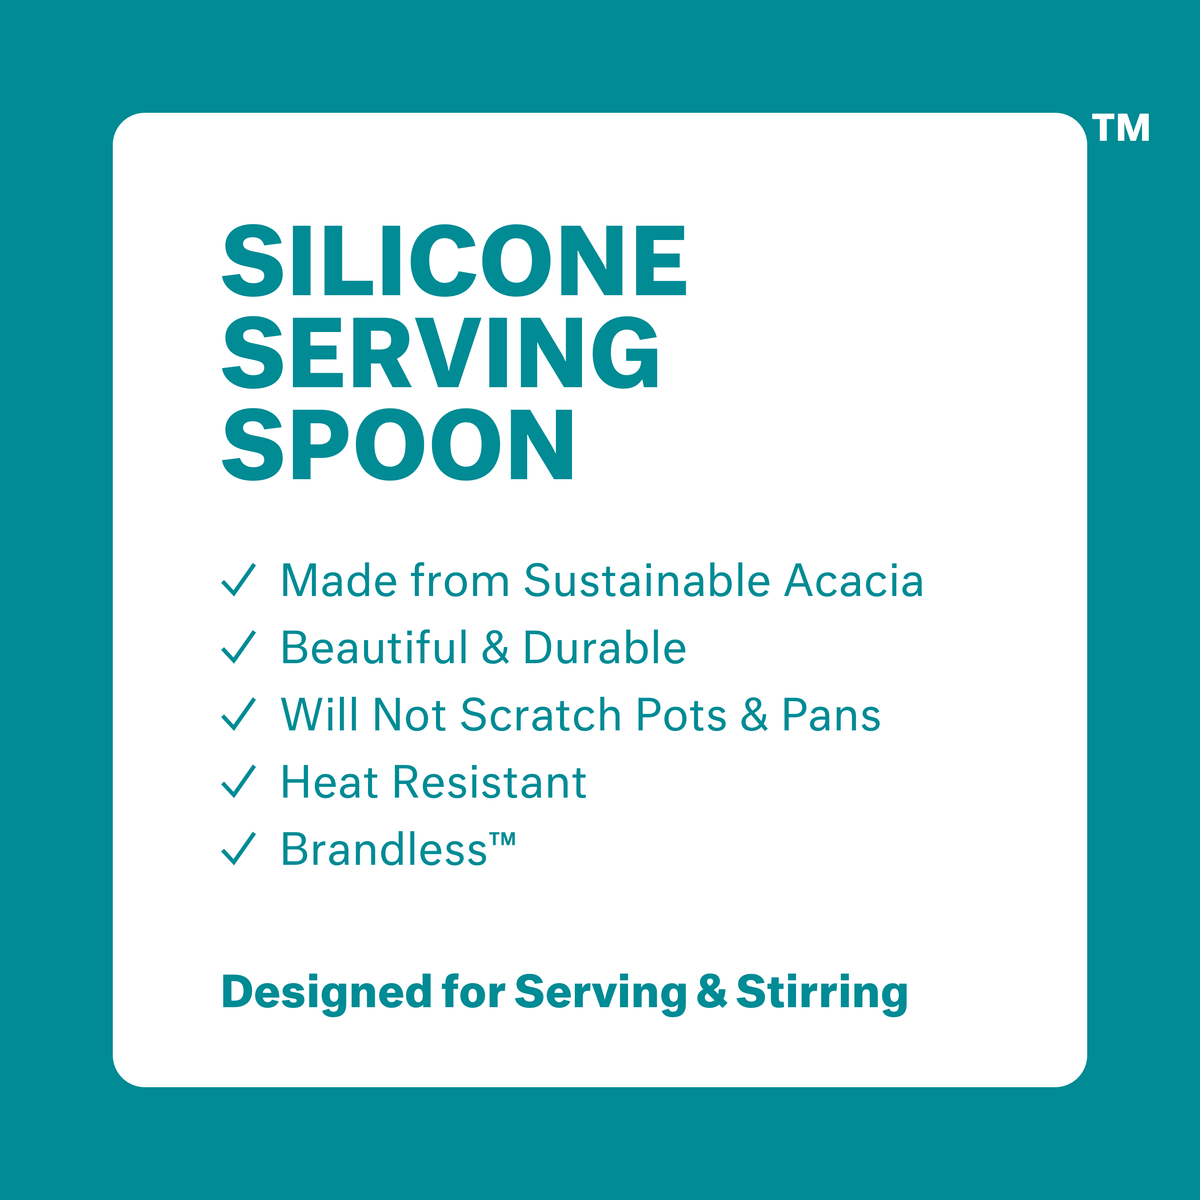 Silicone serving spoon: made from sustainable acacia, beautiul &amp; durable, will not scratch pots &amp; pans, heat resistant, brandless. Designed for serving &amp; stirring.